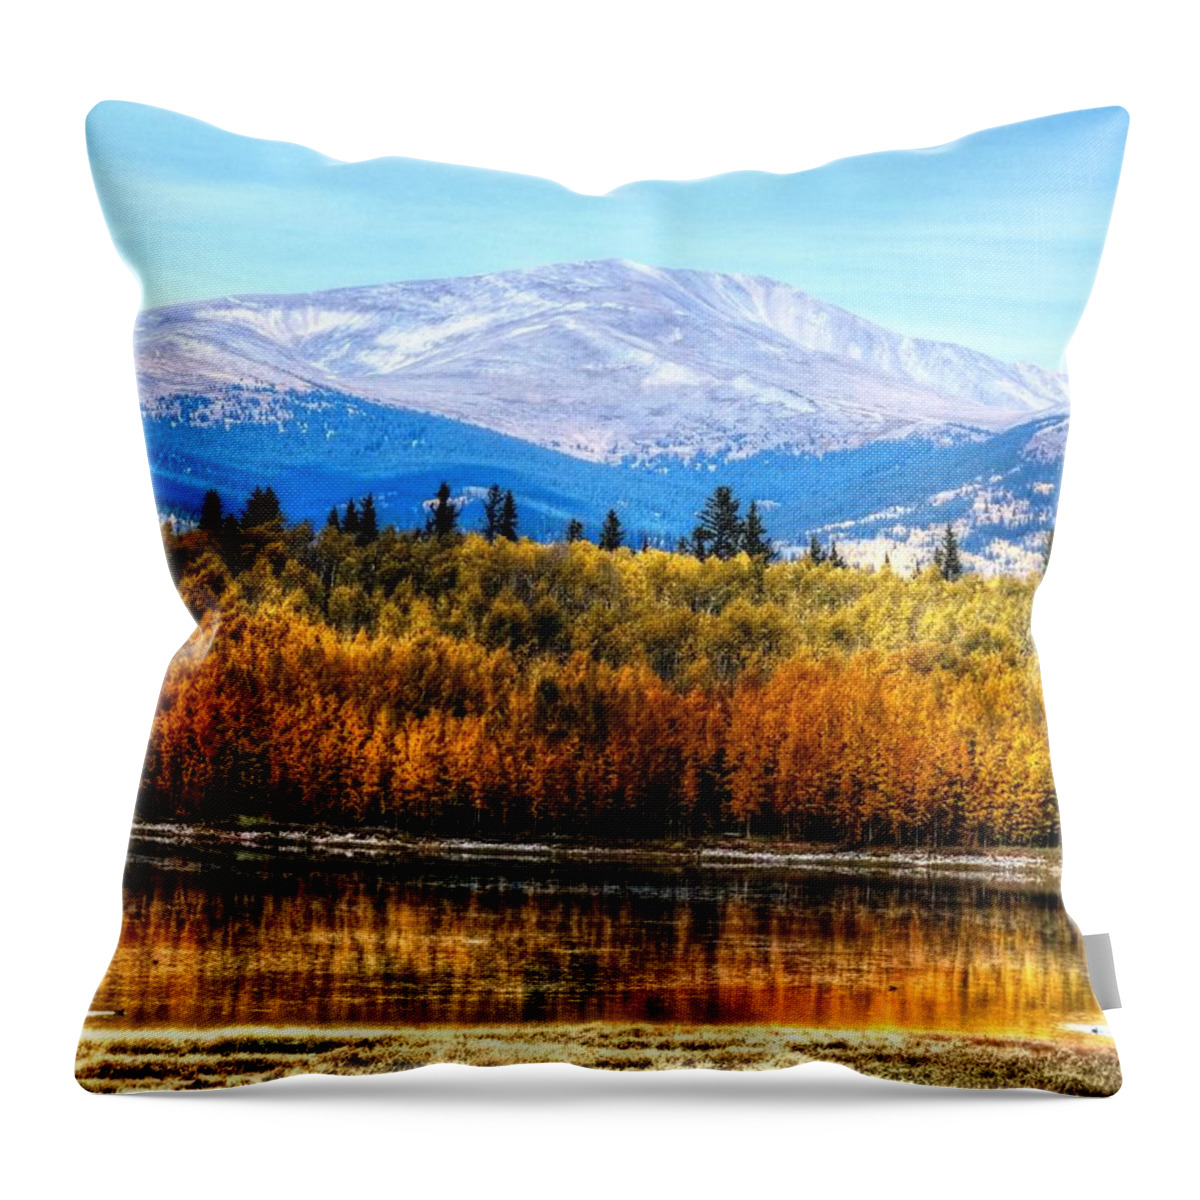 Mt. Silverheels Throw Pillow featuring the photograph Mt. Silverheels with Aspens by Lanita Williams